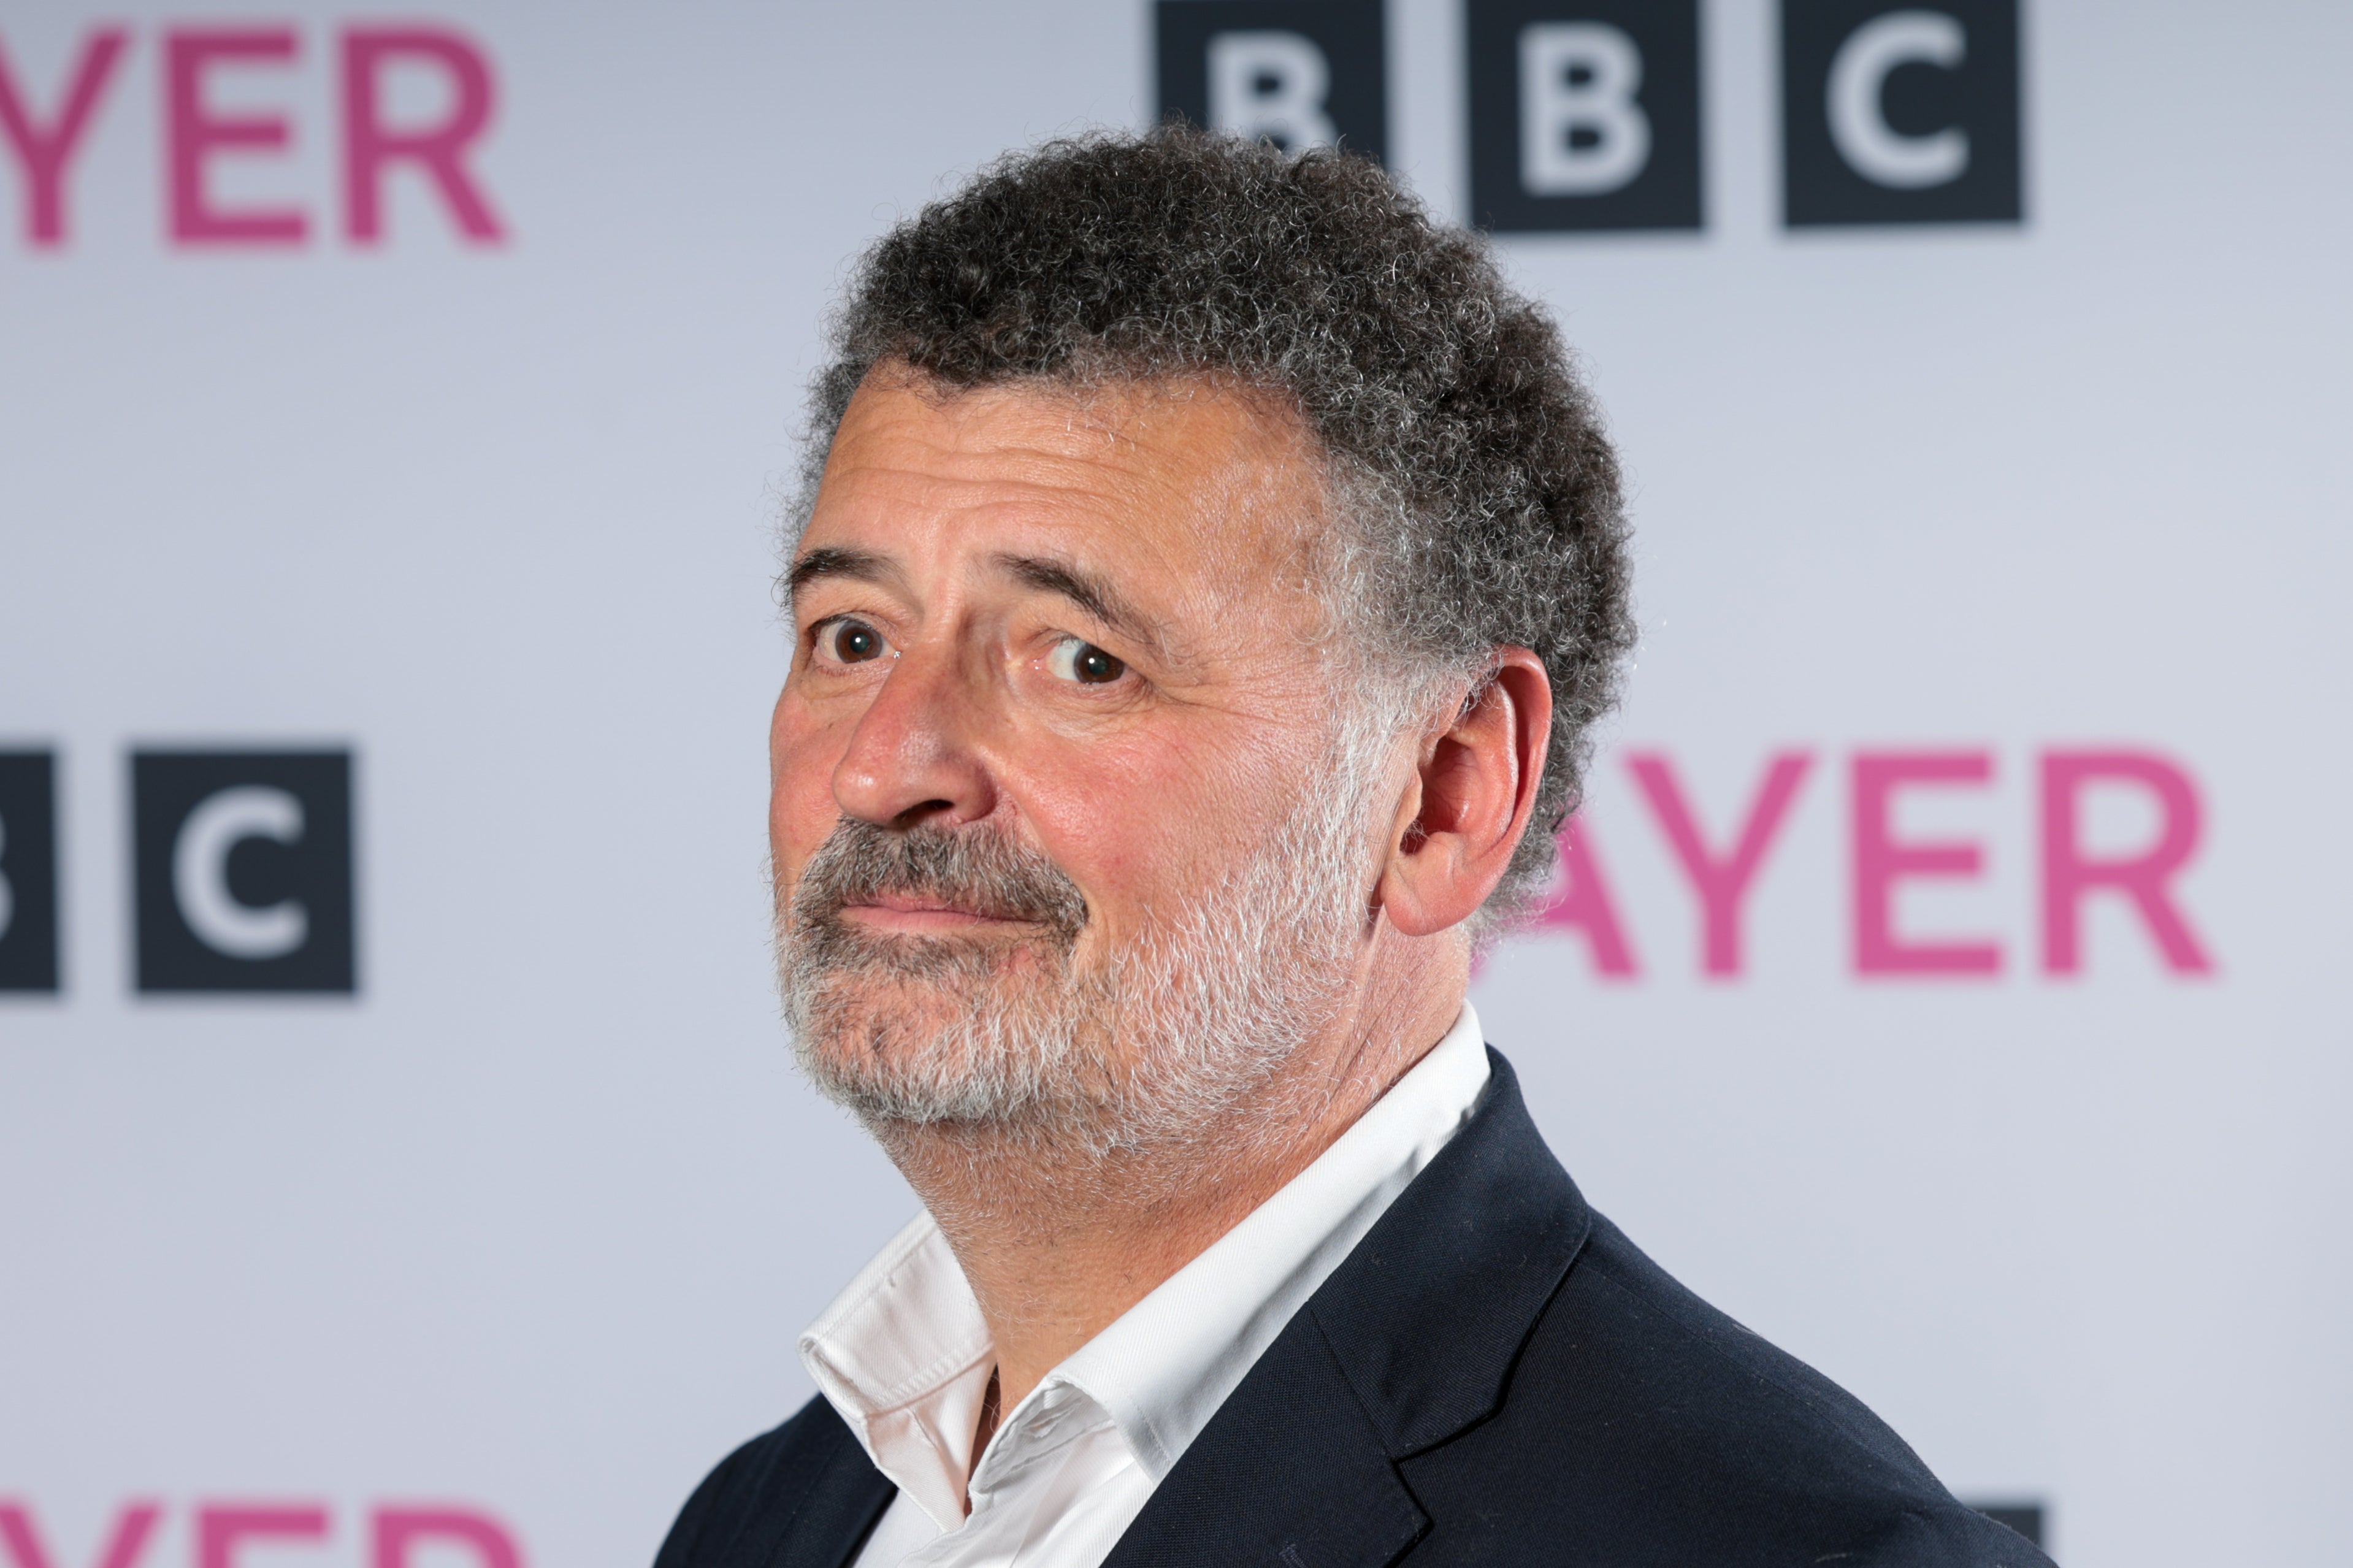 Moffat said that cancellation only works on ‘quite good people’